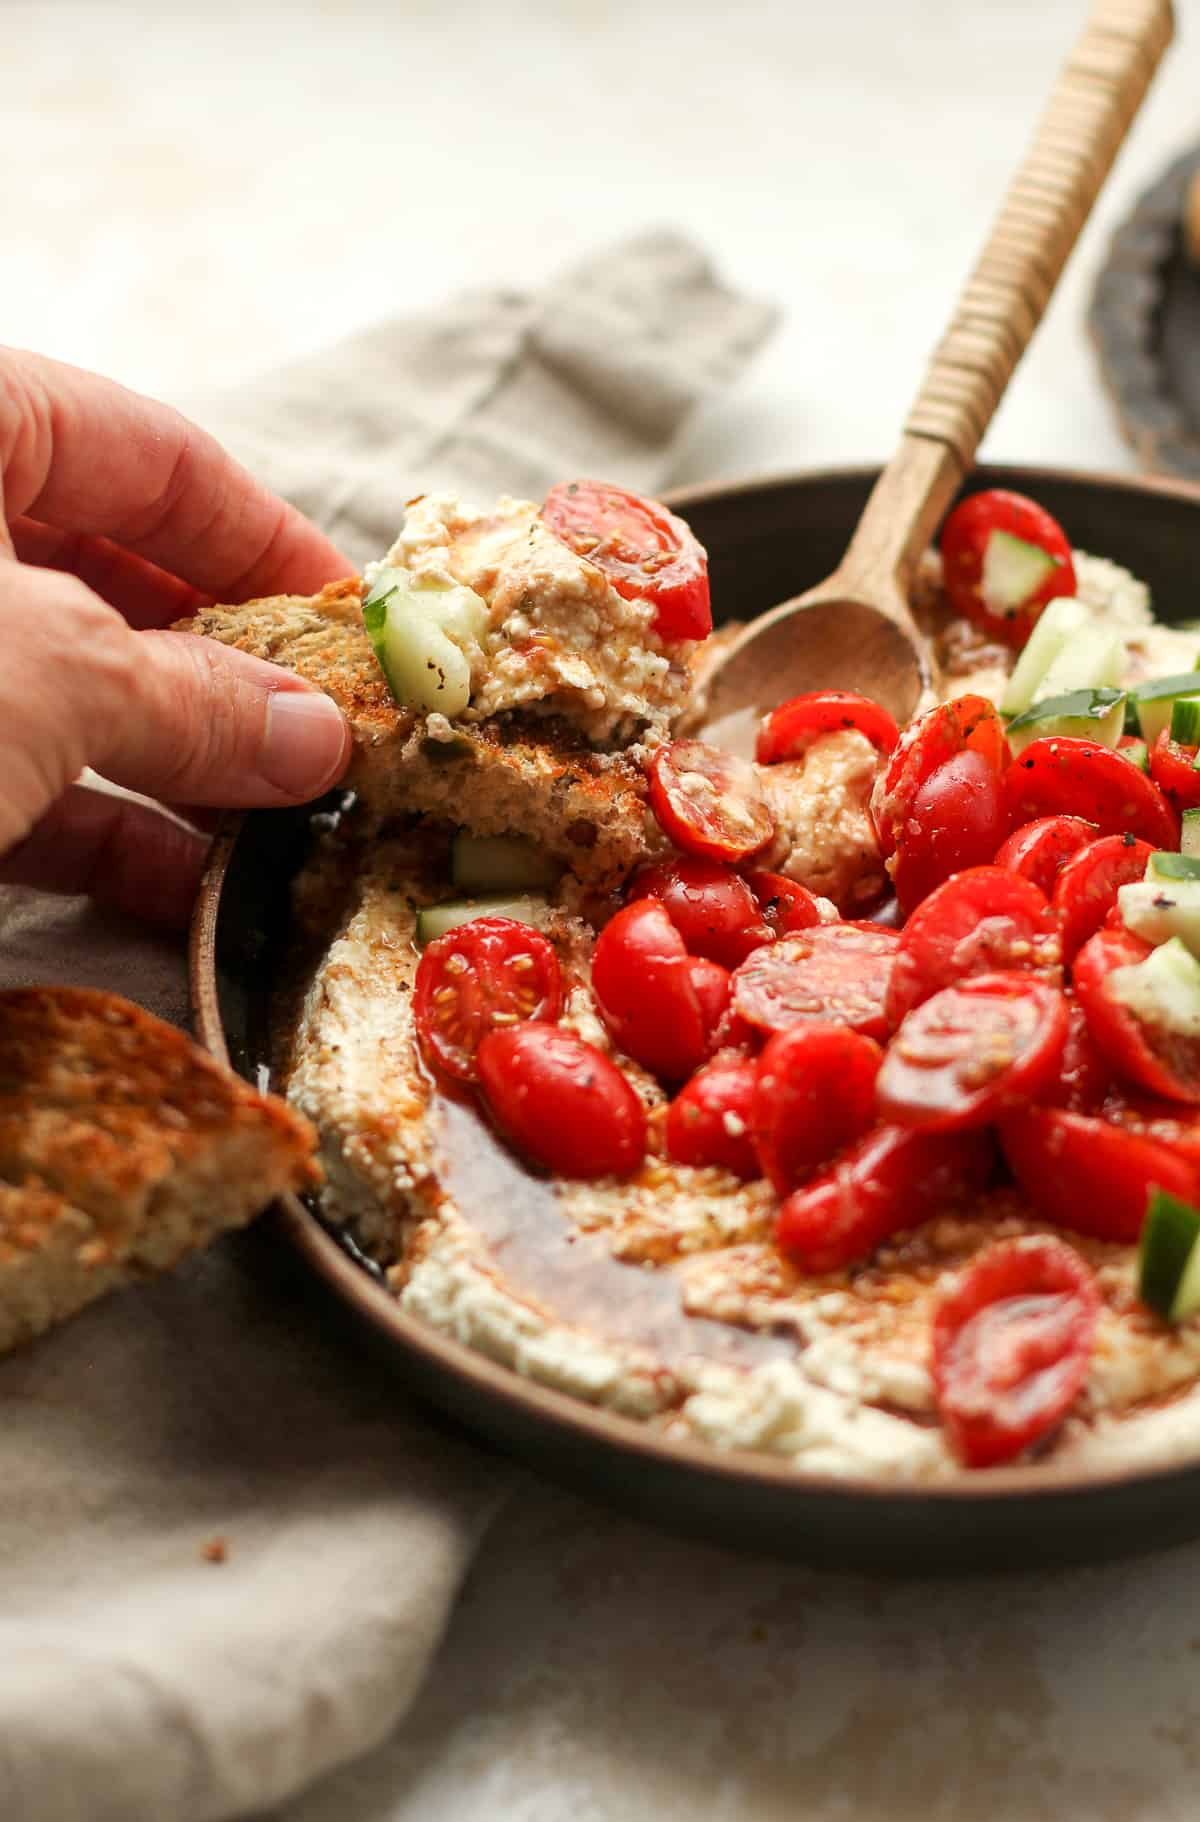 My hand on a toast with feta dip and marinated tomatoes.